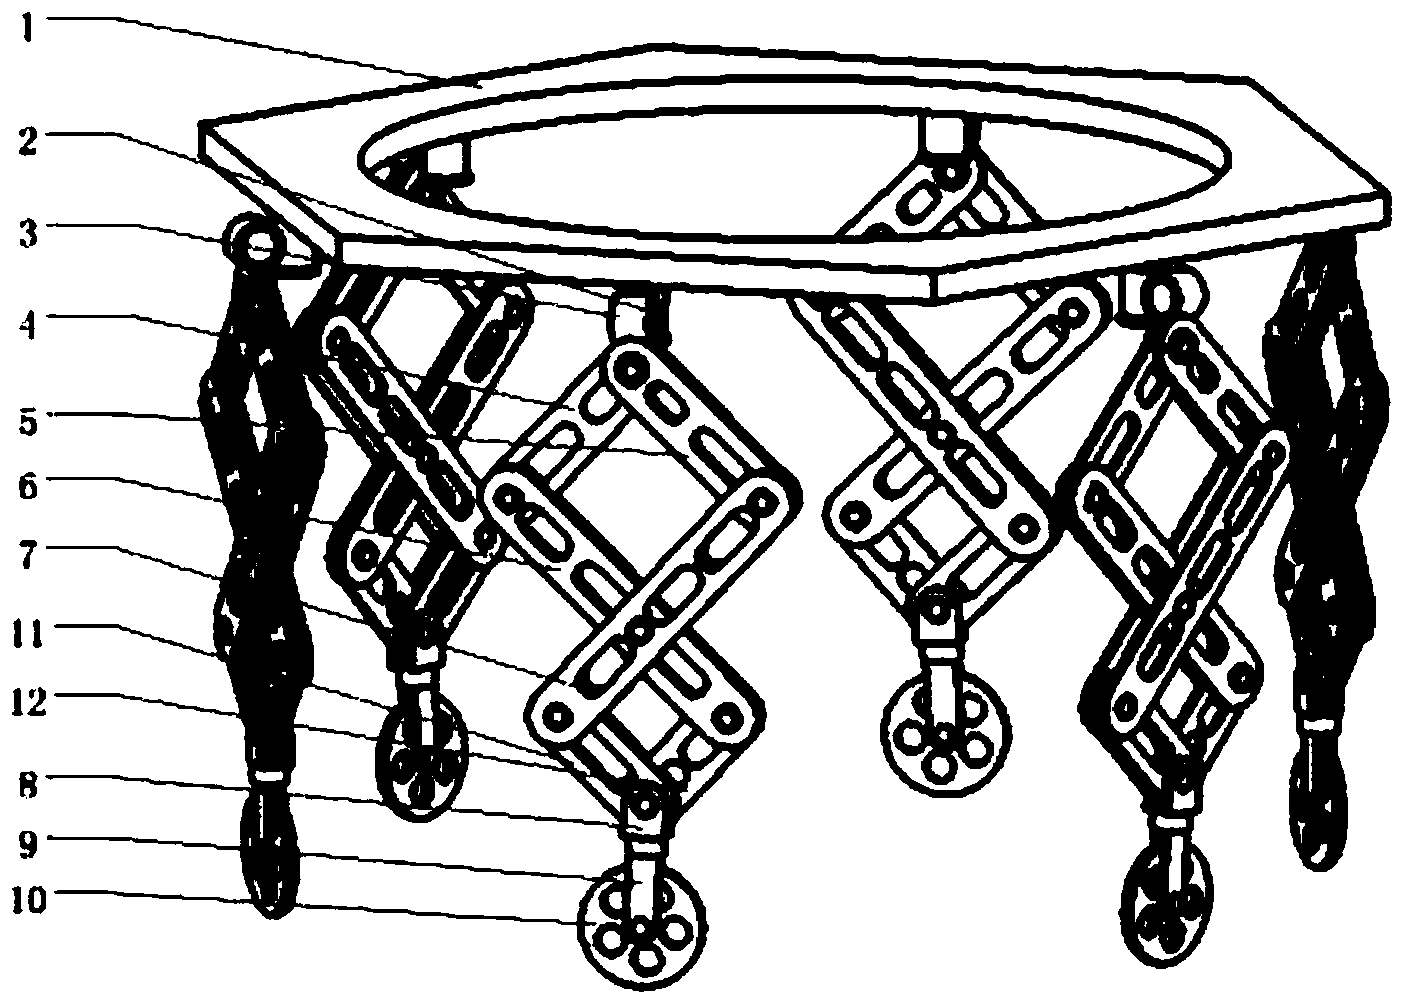 Wheel-legged mobile robot suitable for complicated terrains